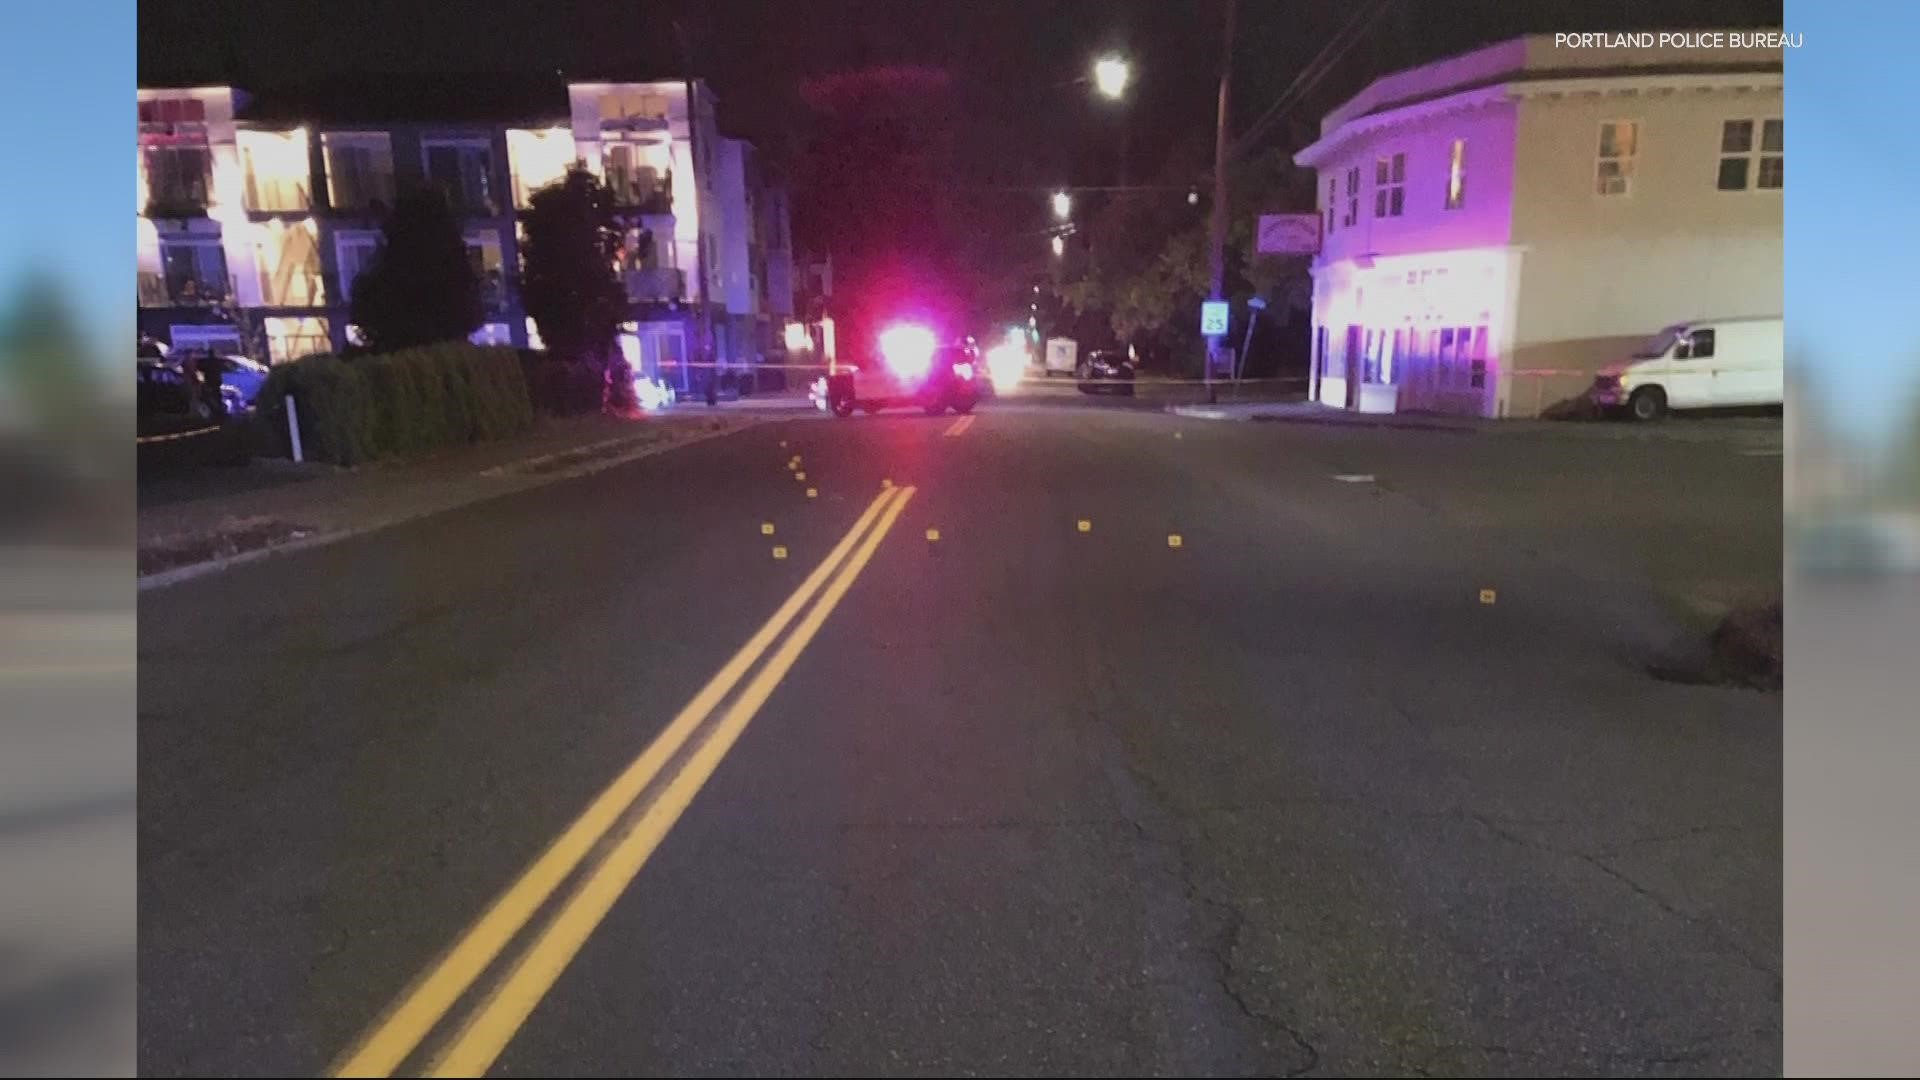 Police said 8 cars were hit in two different shootings in Portland Monday night. There have been more than 875 shootings in the city this year.